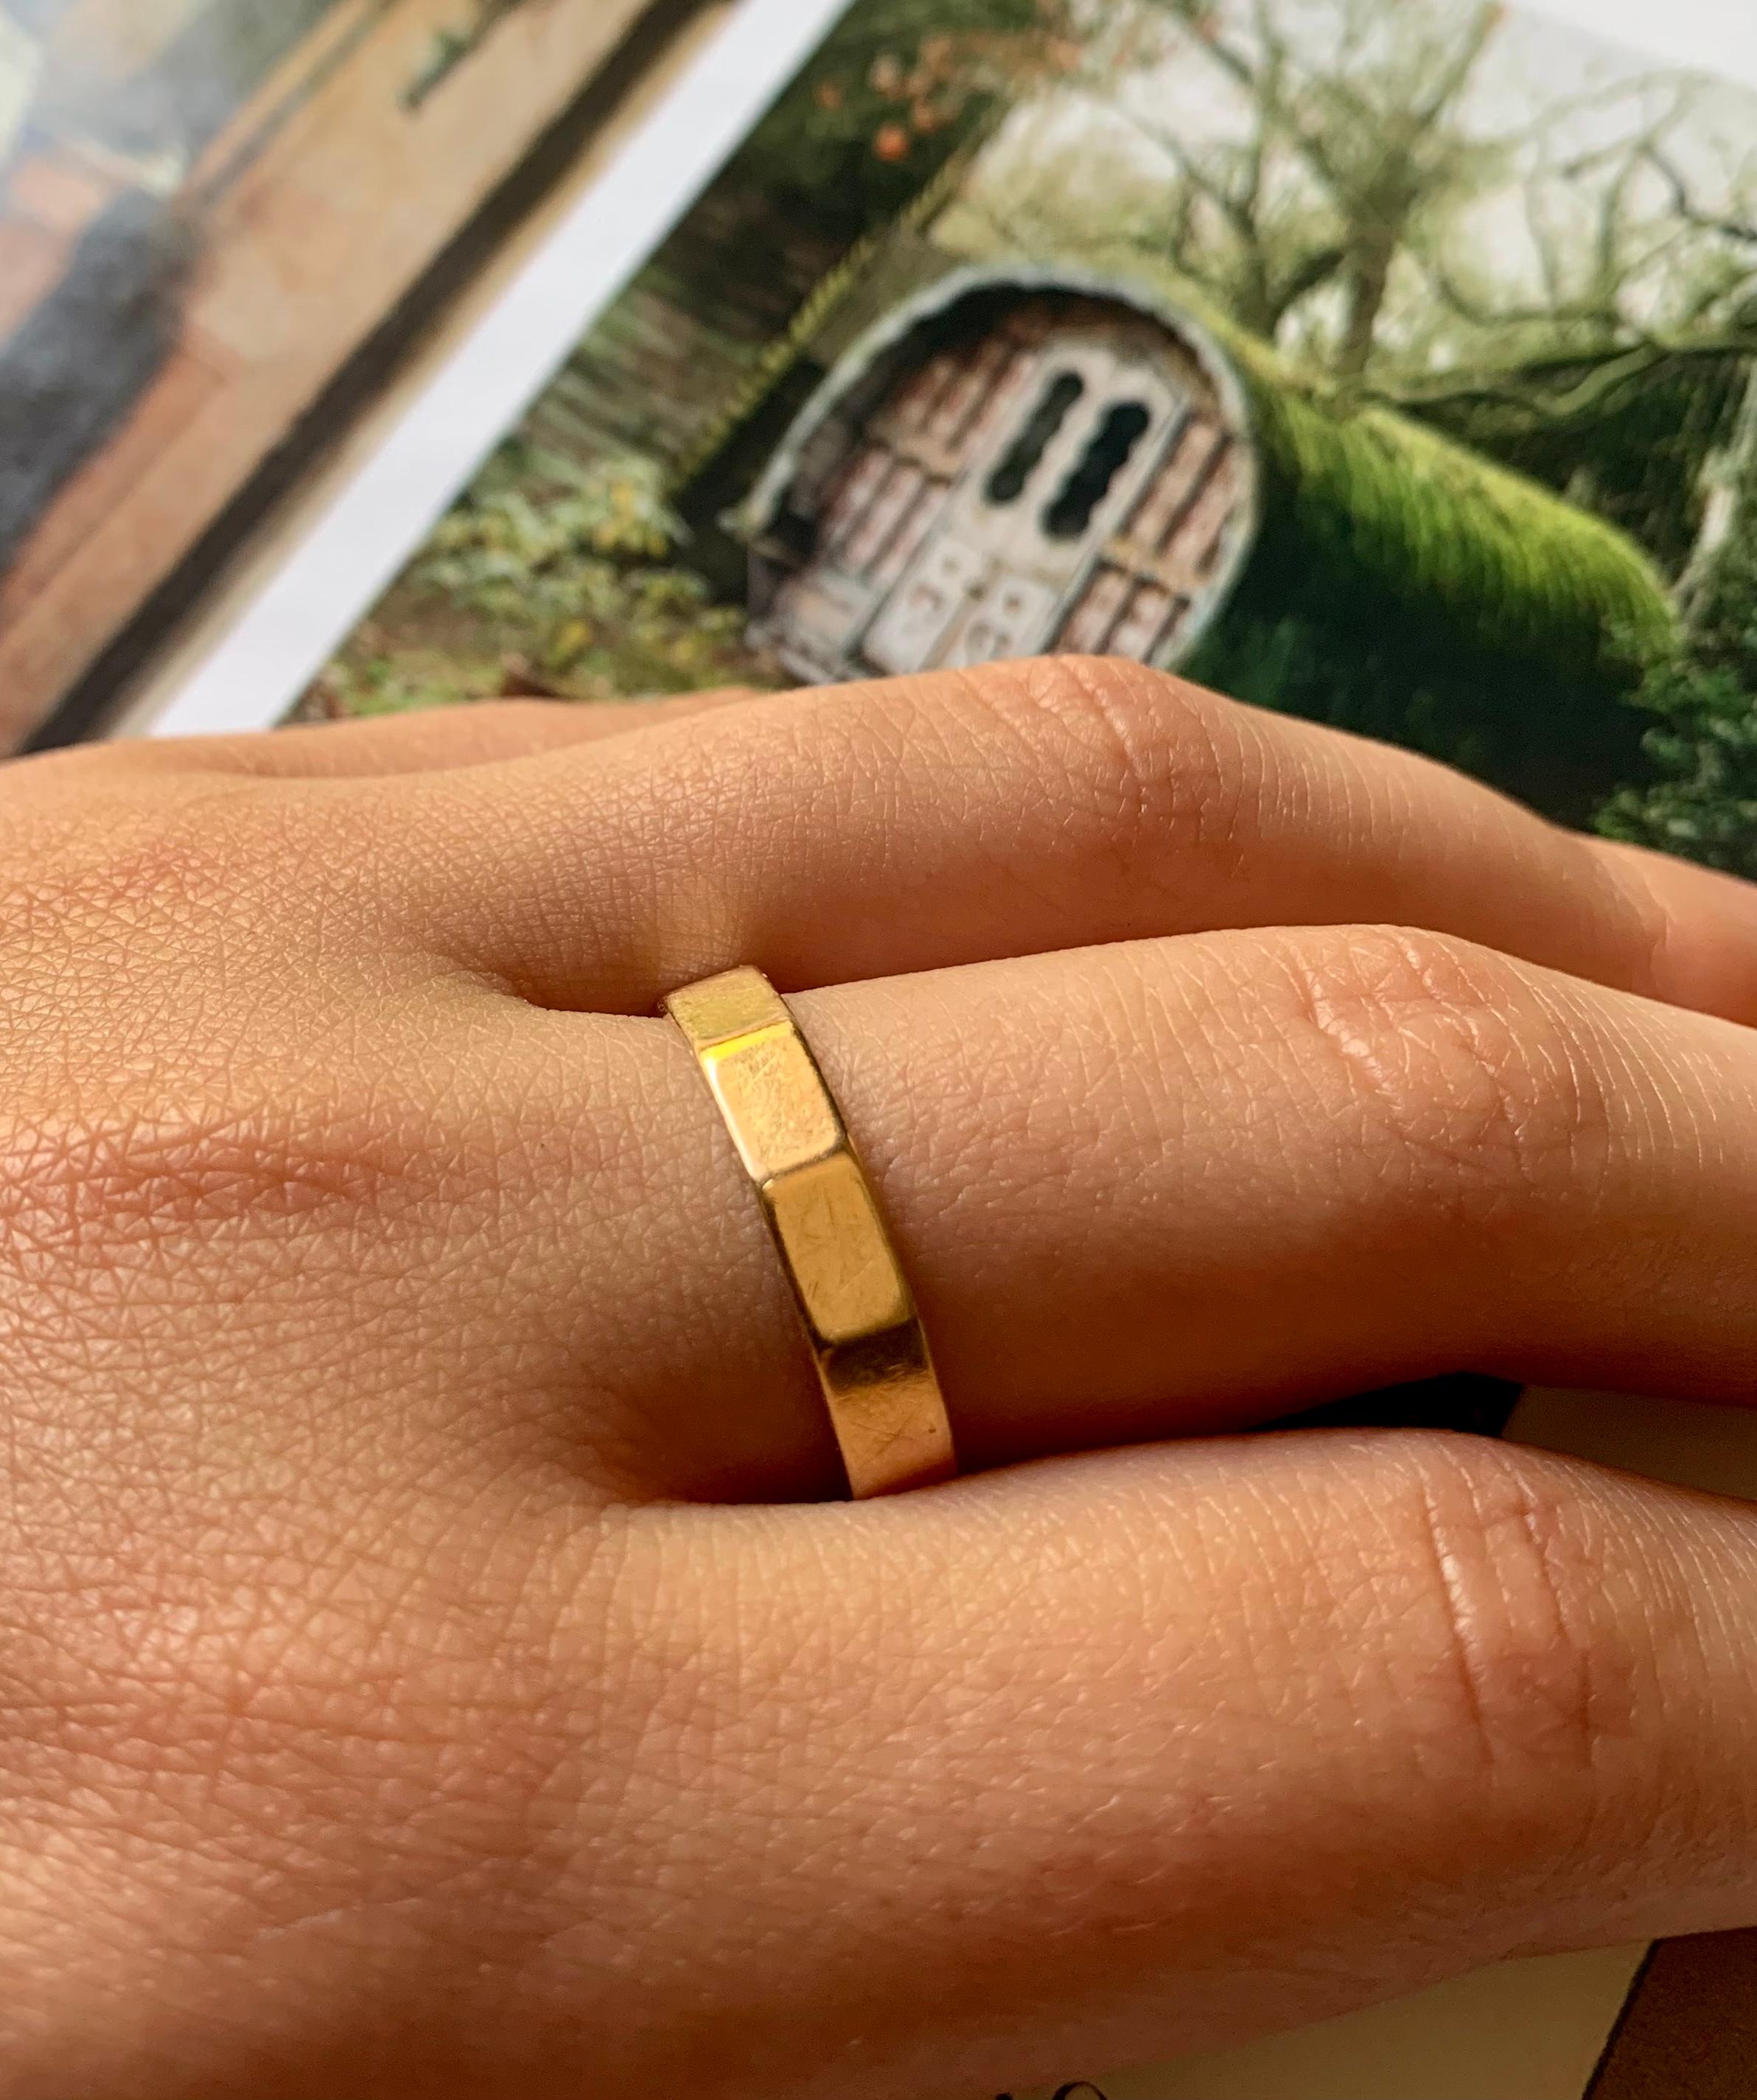 Interesting and unusual 1960's Modernist twelve sided Dodecagon 14K yellow gold band ring. The number twelve is a symbol of unity, balance and completeness in reference to the twelve months of the year, the twelve zodiac signs and twelve hours of